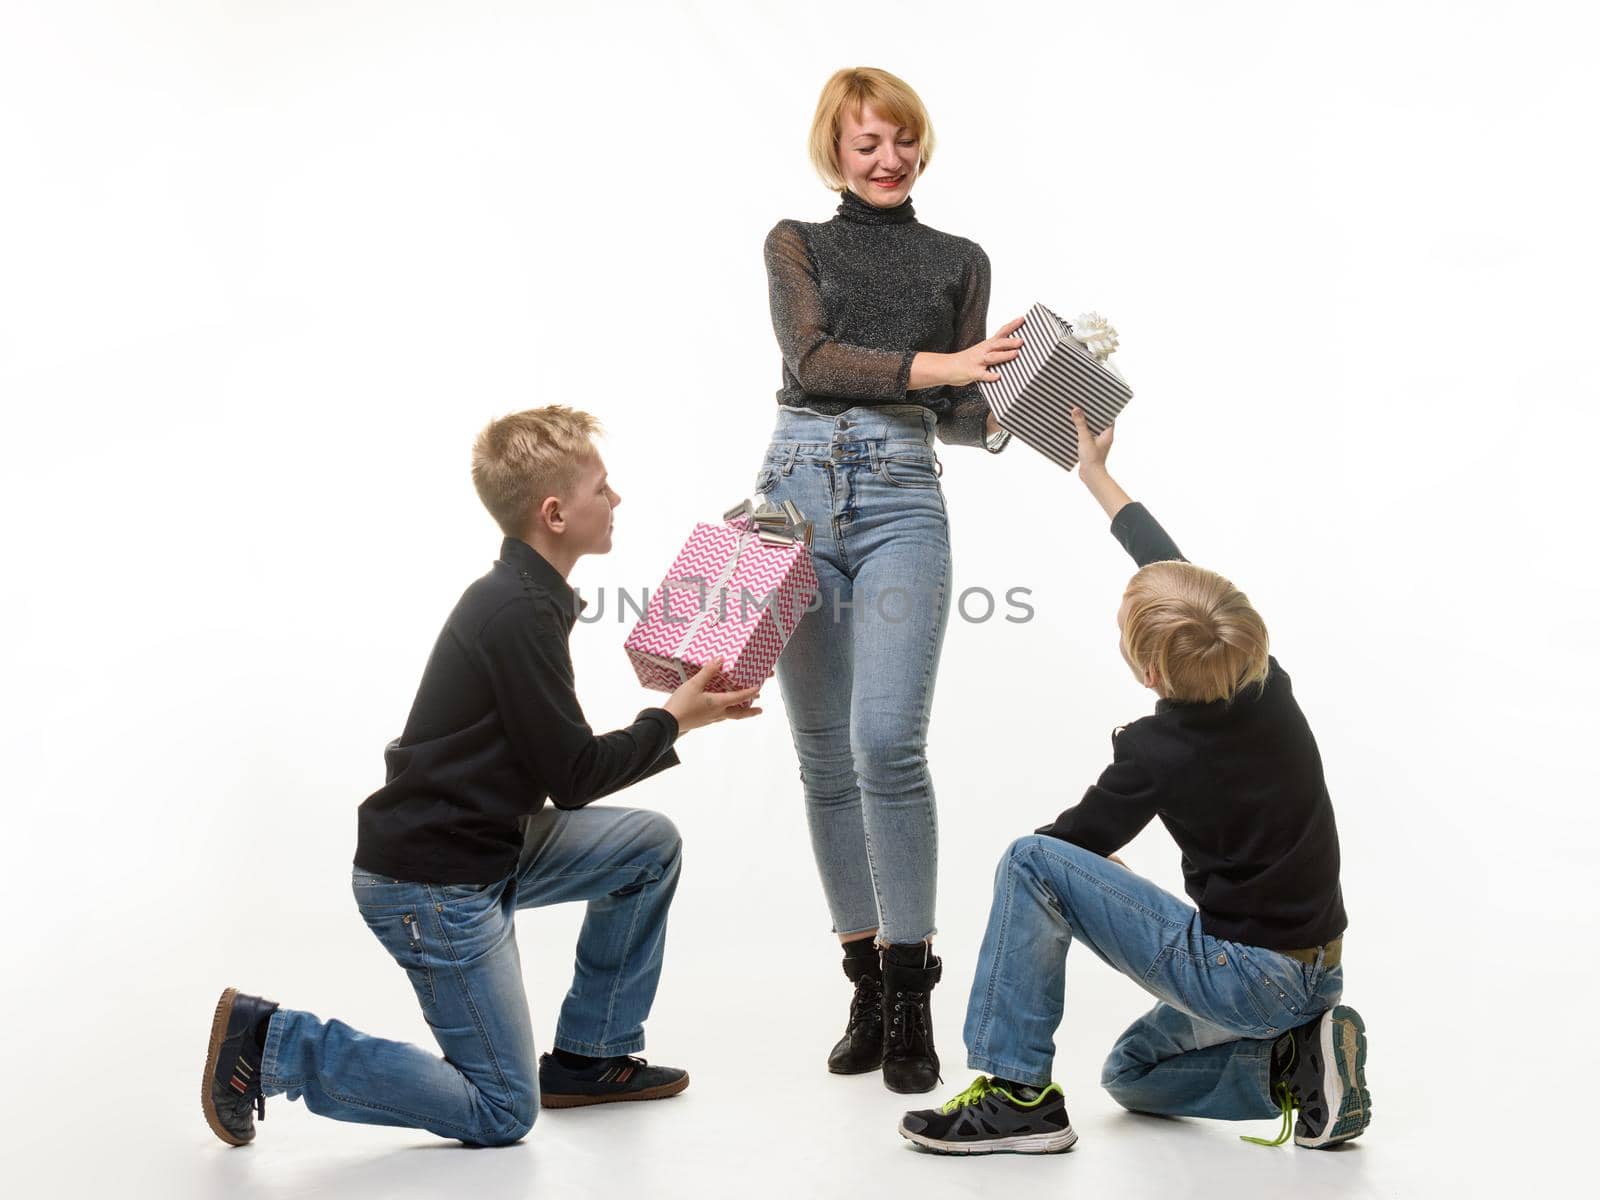 Children give a gift to mom, kneeling, mom picks up one of the gifts, white background